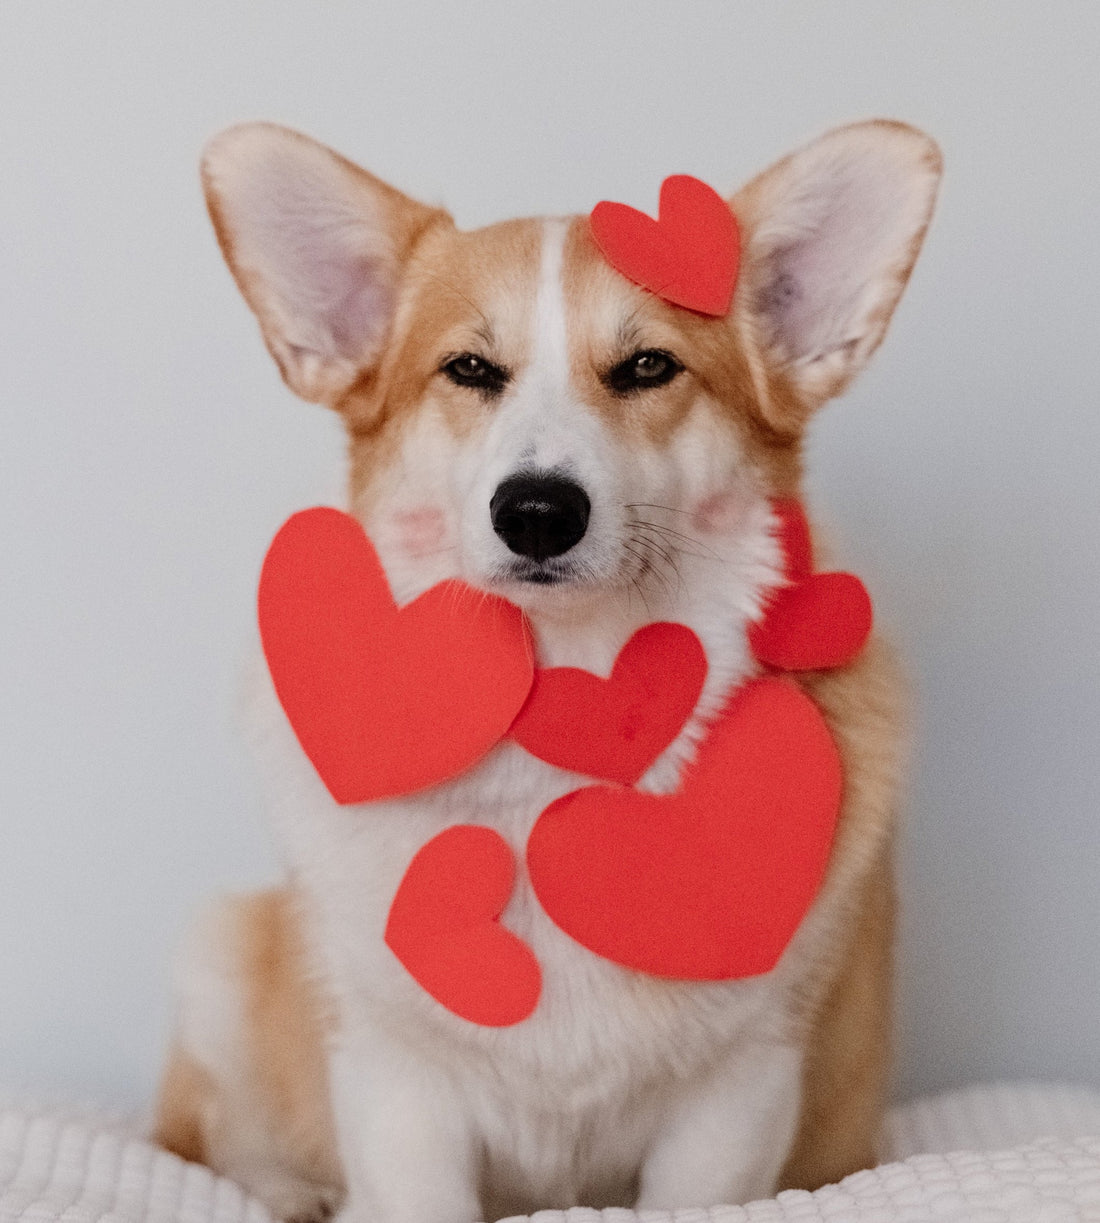 9 Best Valentine’s Day Gift Ideas for Dogs and Dog Lovers